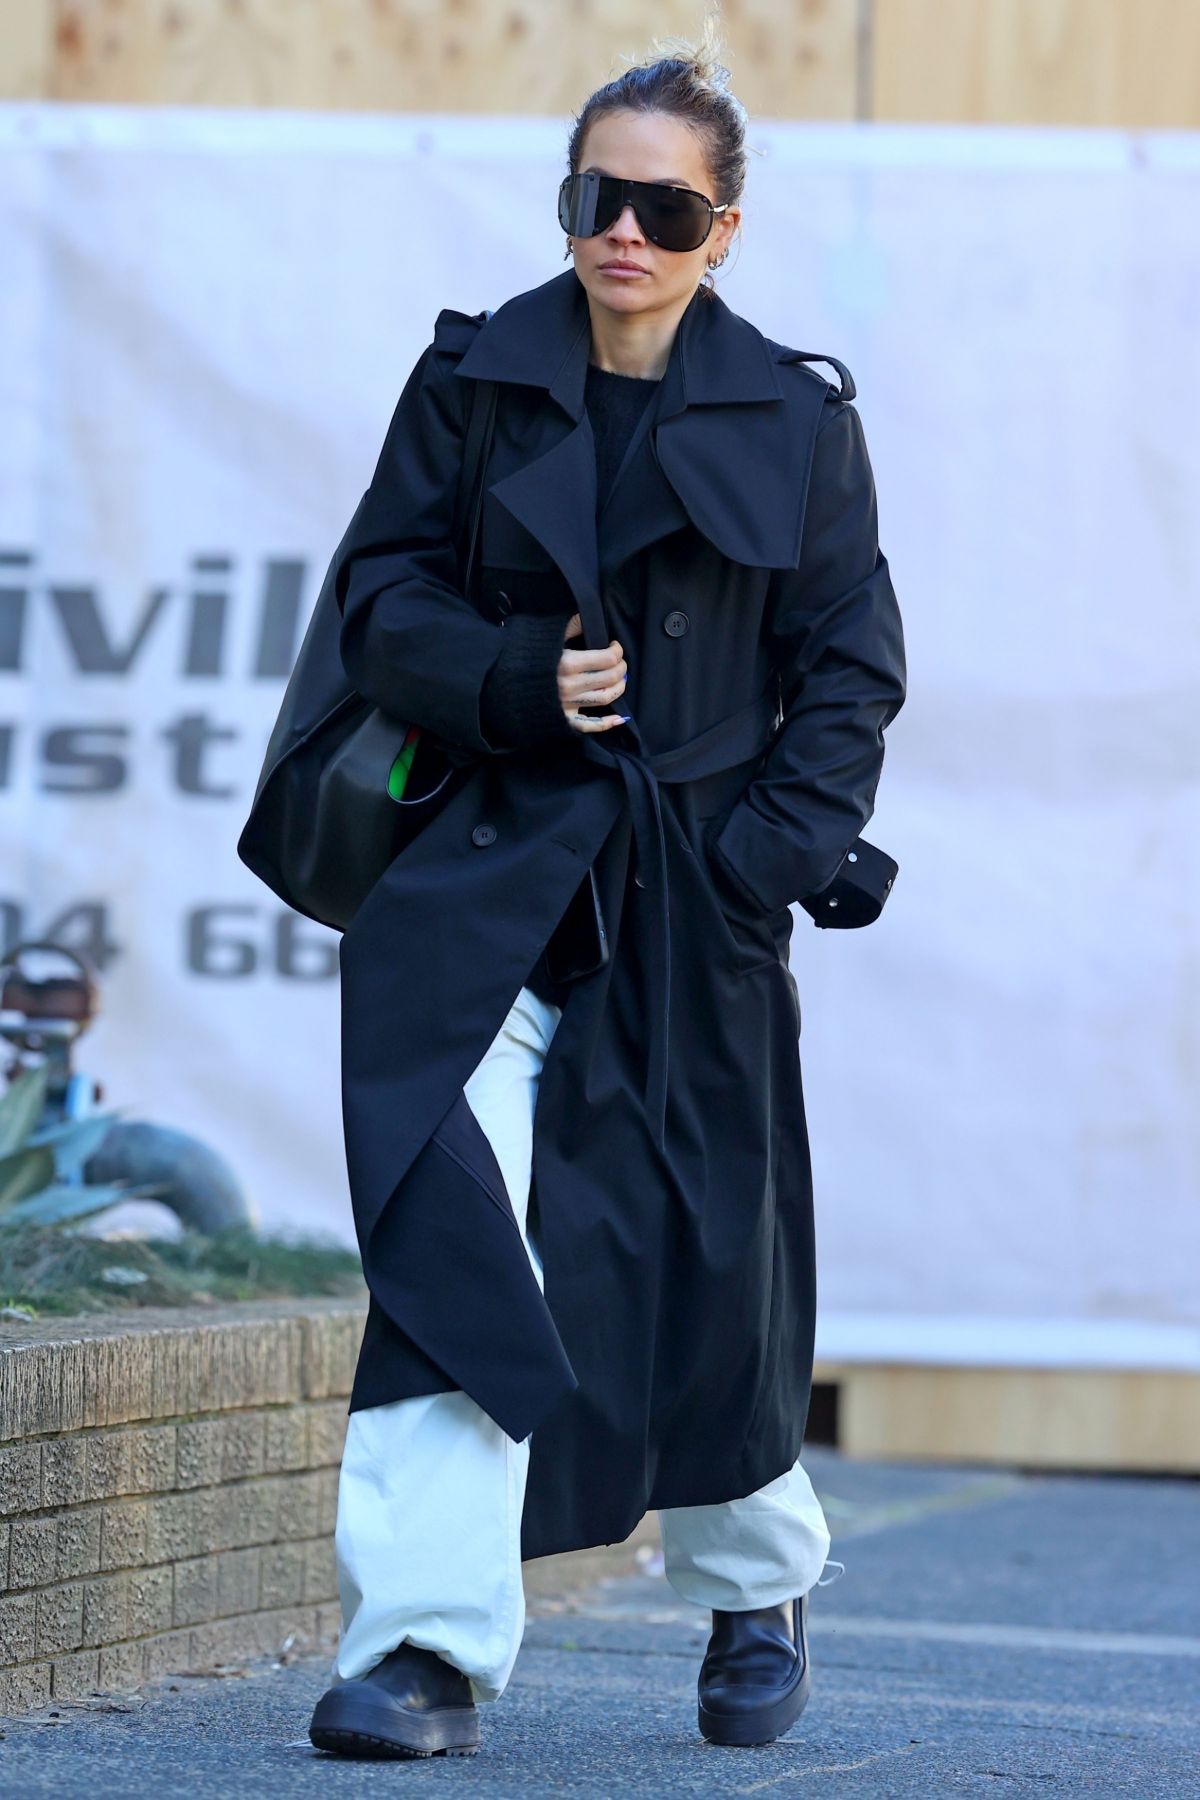 RITA ORA in a Black Trench Coat Out in Sydney 06/20/2023 – HawtCelebs